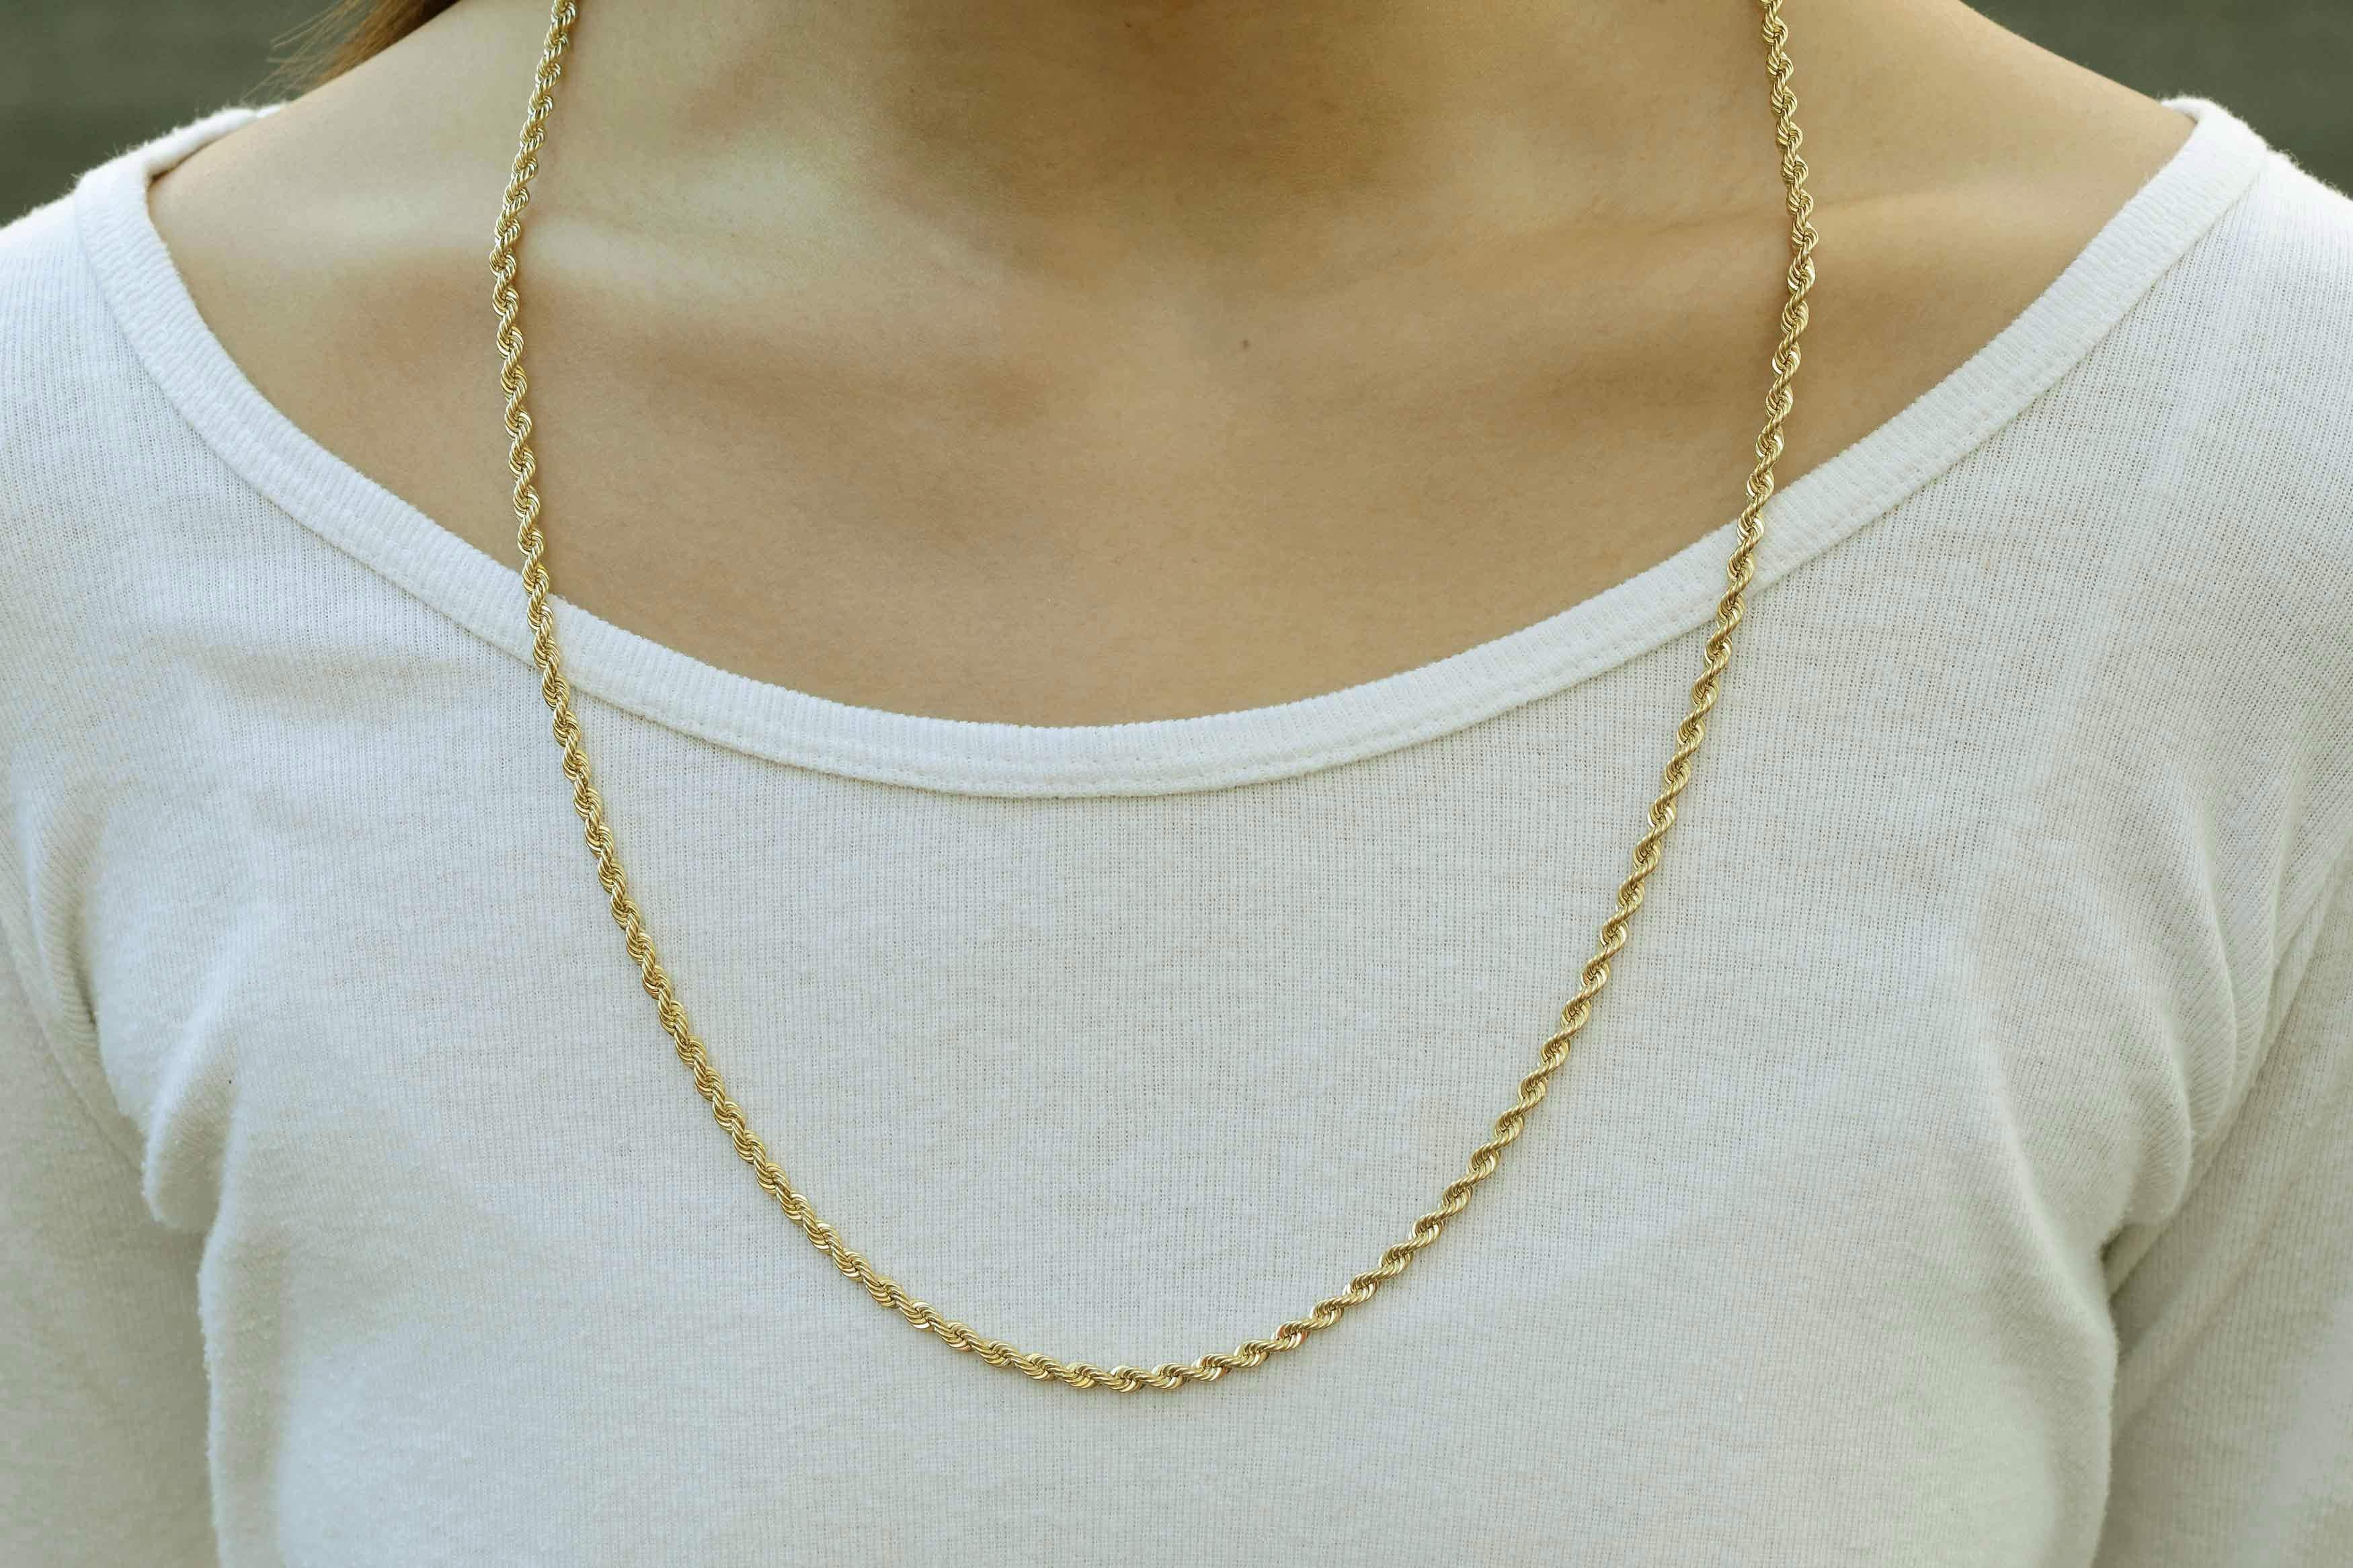 An authentic vintage Tiffany & Co. rope chain. Finely polished 14k yellow gold is twisted into this stunning French rope style, 28